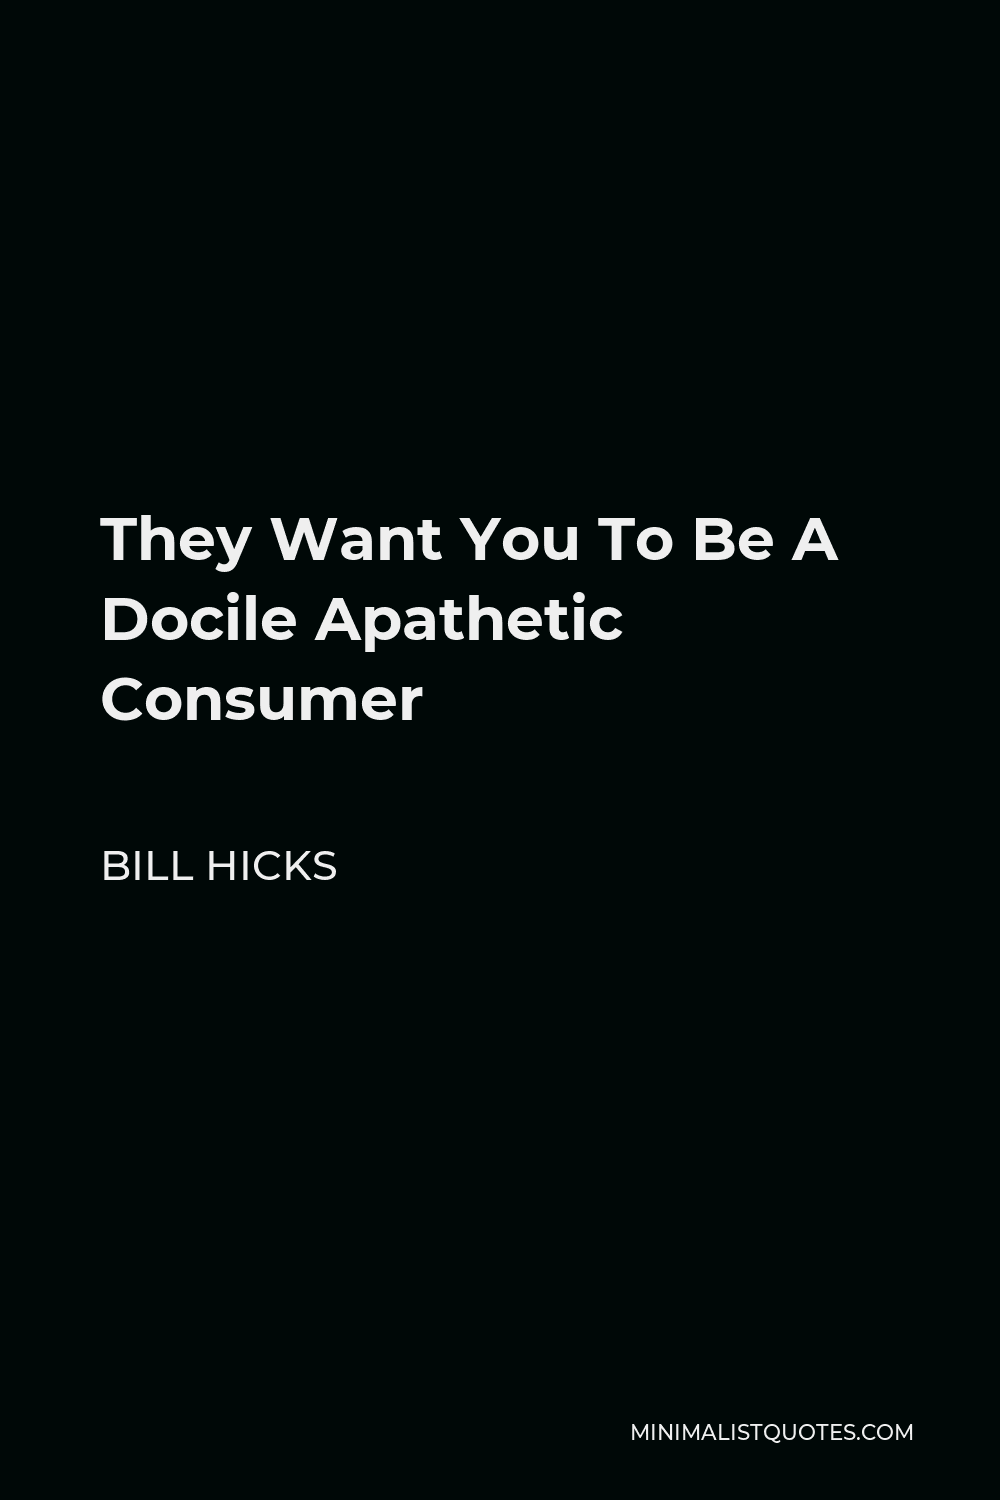 Bill Hicks Quote - They Want You To Be A Docile Apathetic Consumer